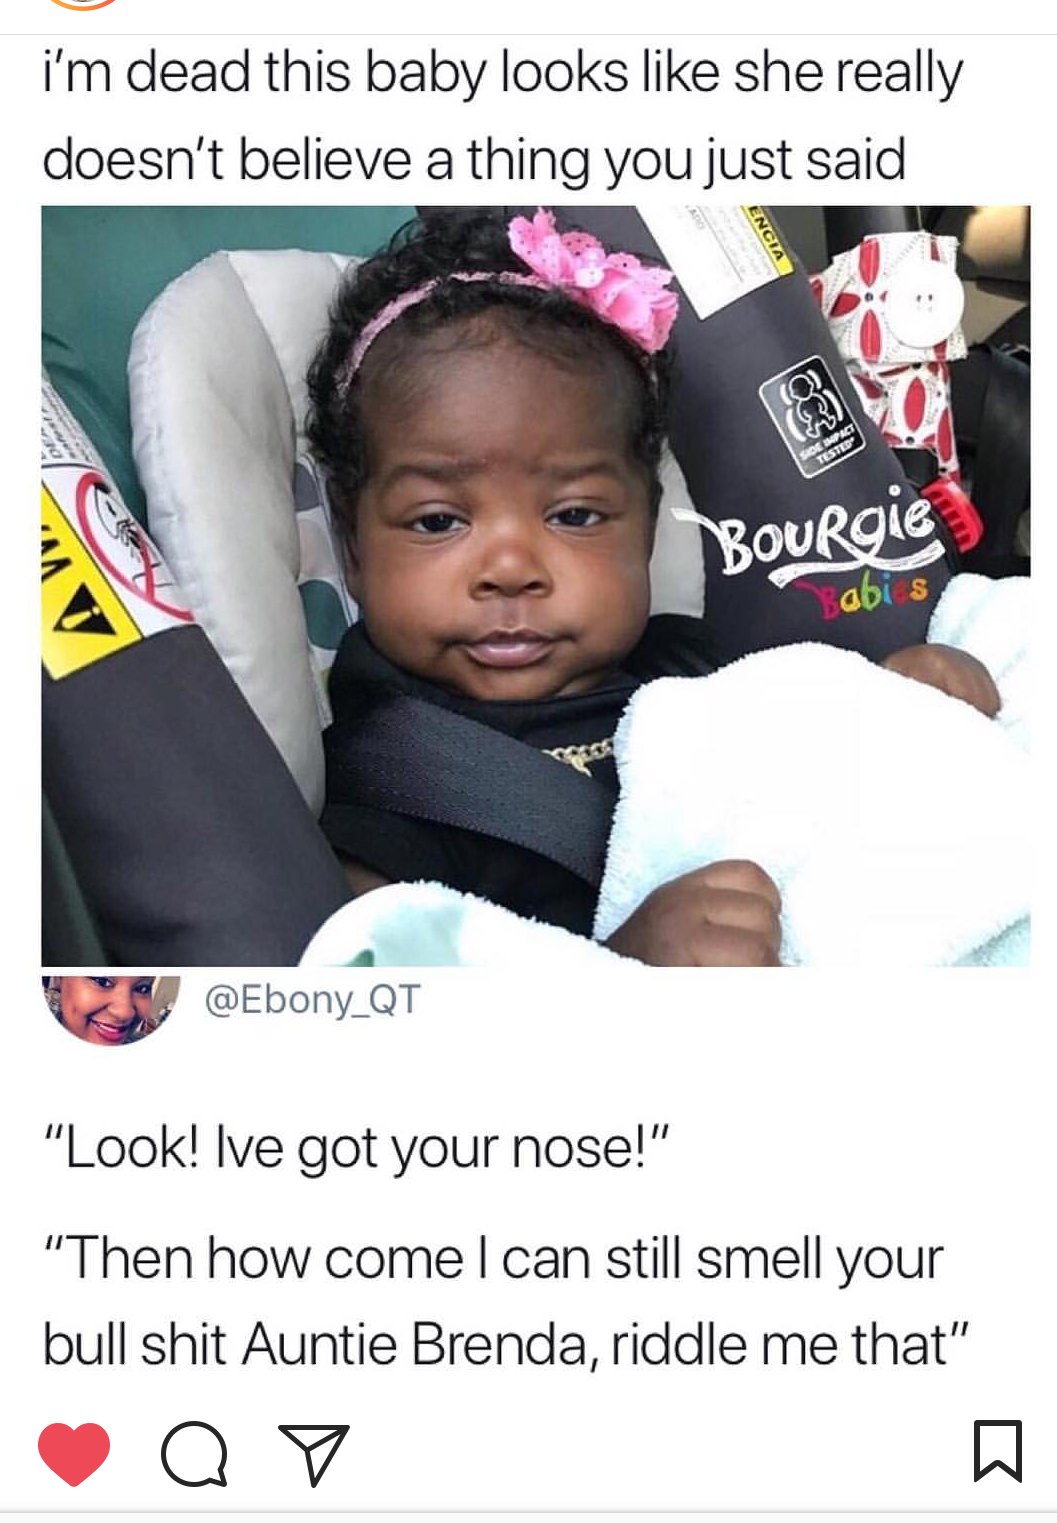 riddle me that meme - i'm dead this baby looks she really doesn't believe a thing you just said Joe Inpact Tested Bourgie abis "Look! Ive got your nose!" "Then how comel can still smell your bull shit Auntie Brenda, riddle me that" o o K